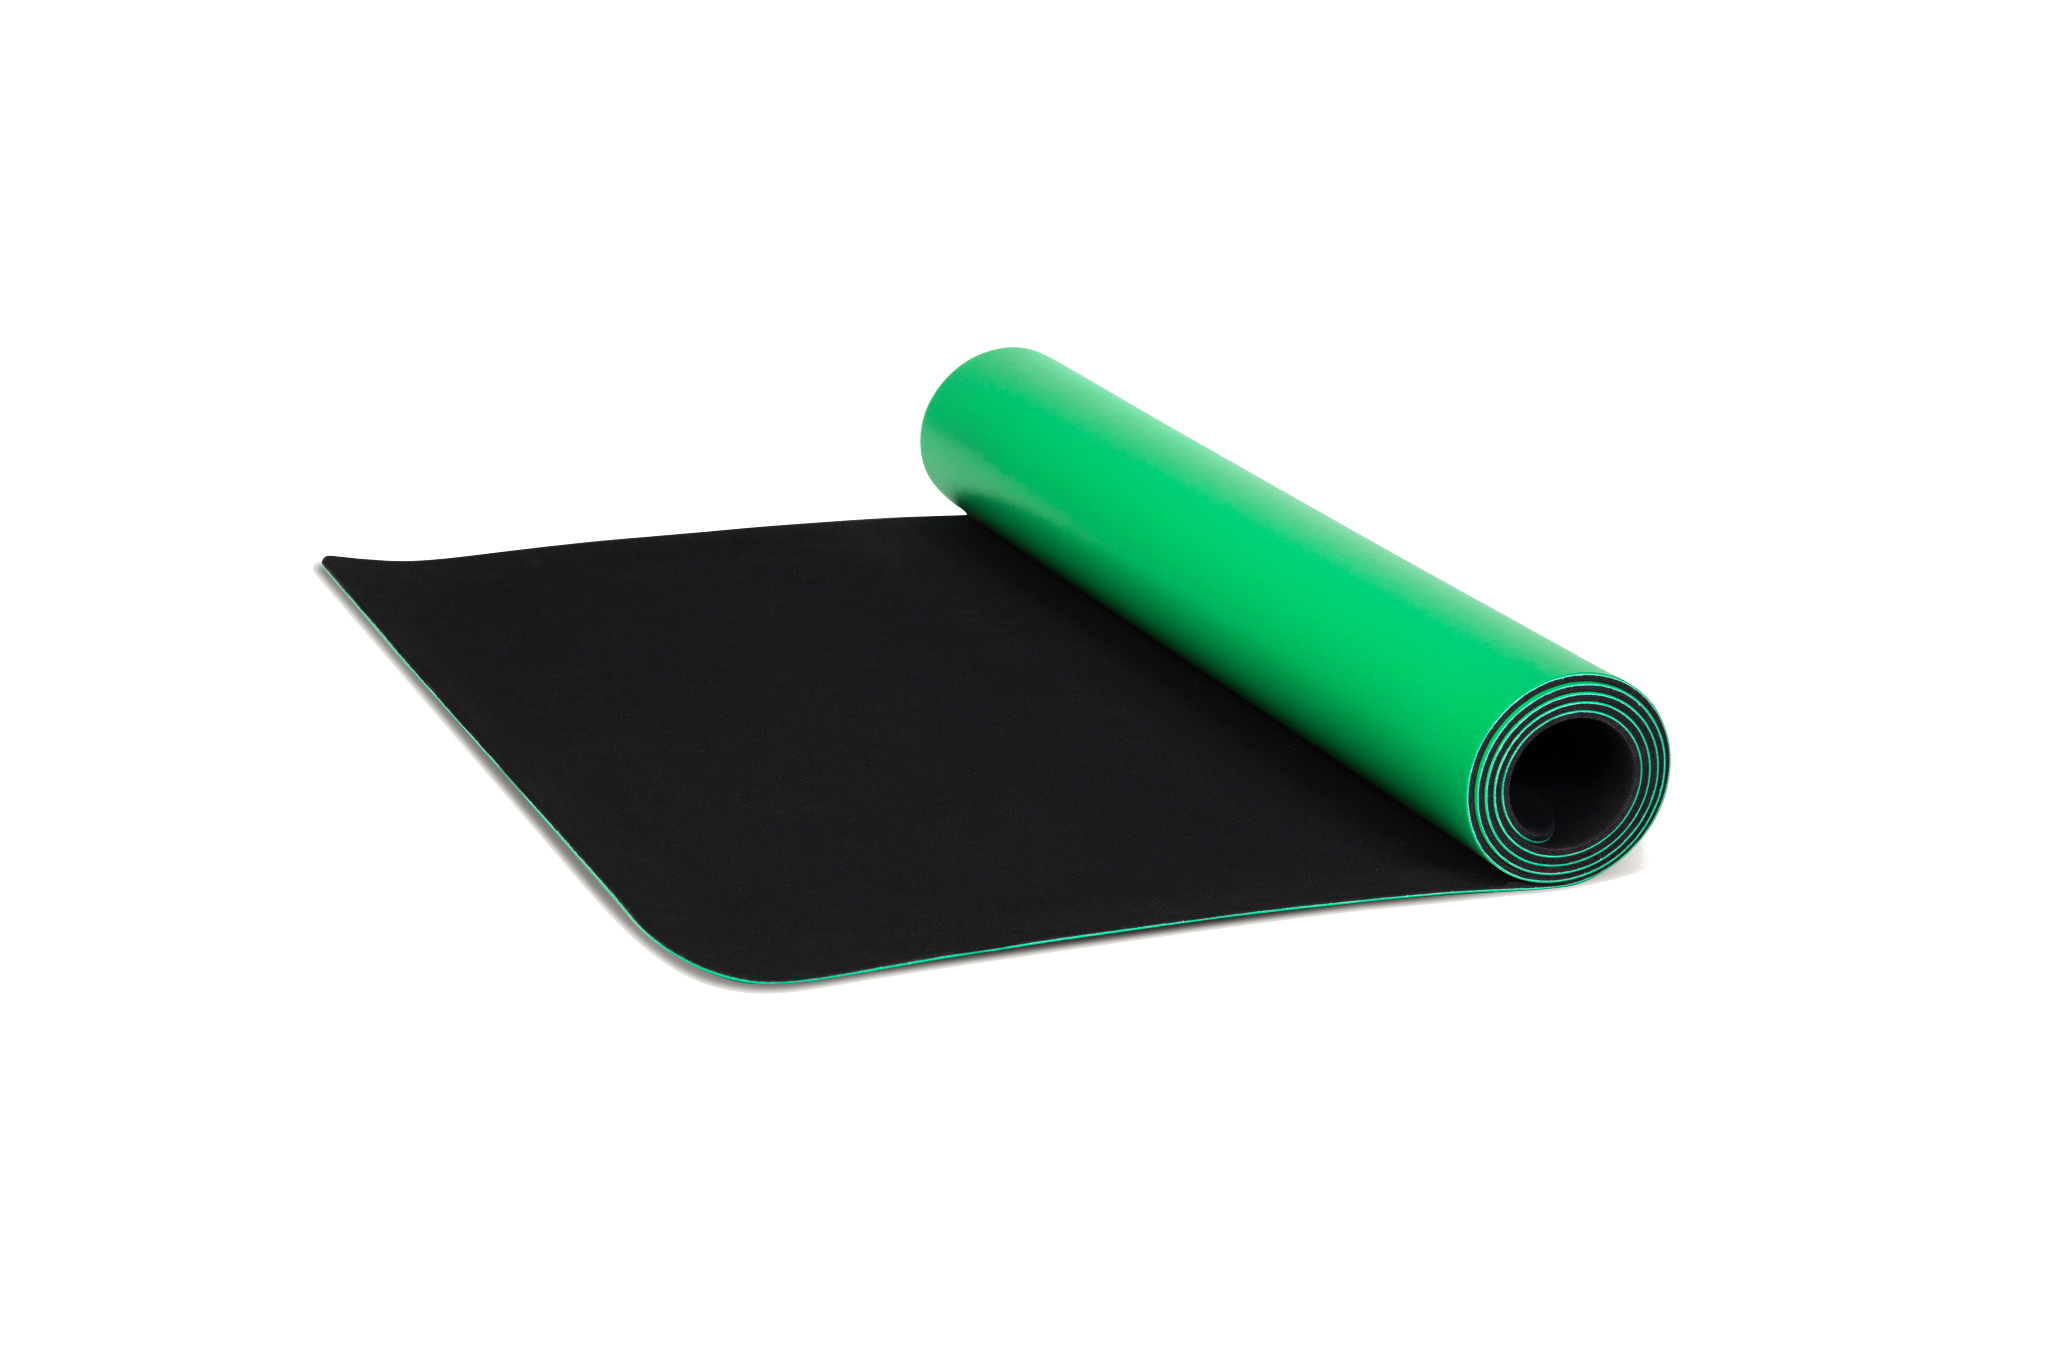 Eco-friendly green yoga mat unrolling made from natural tree rubber.